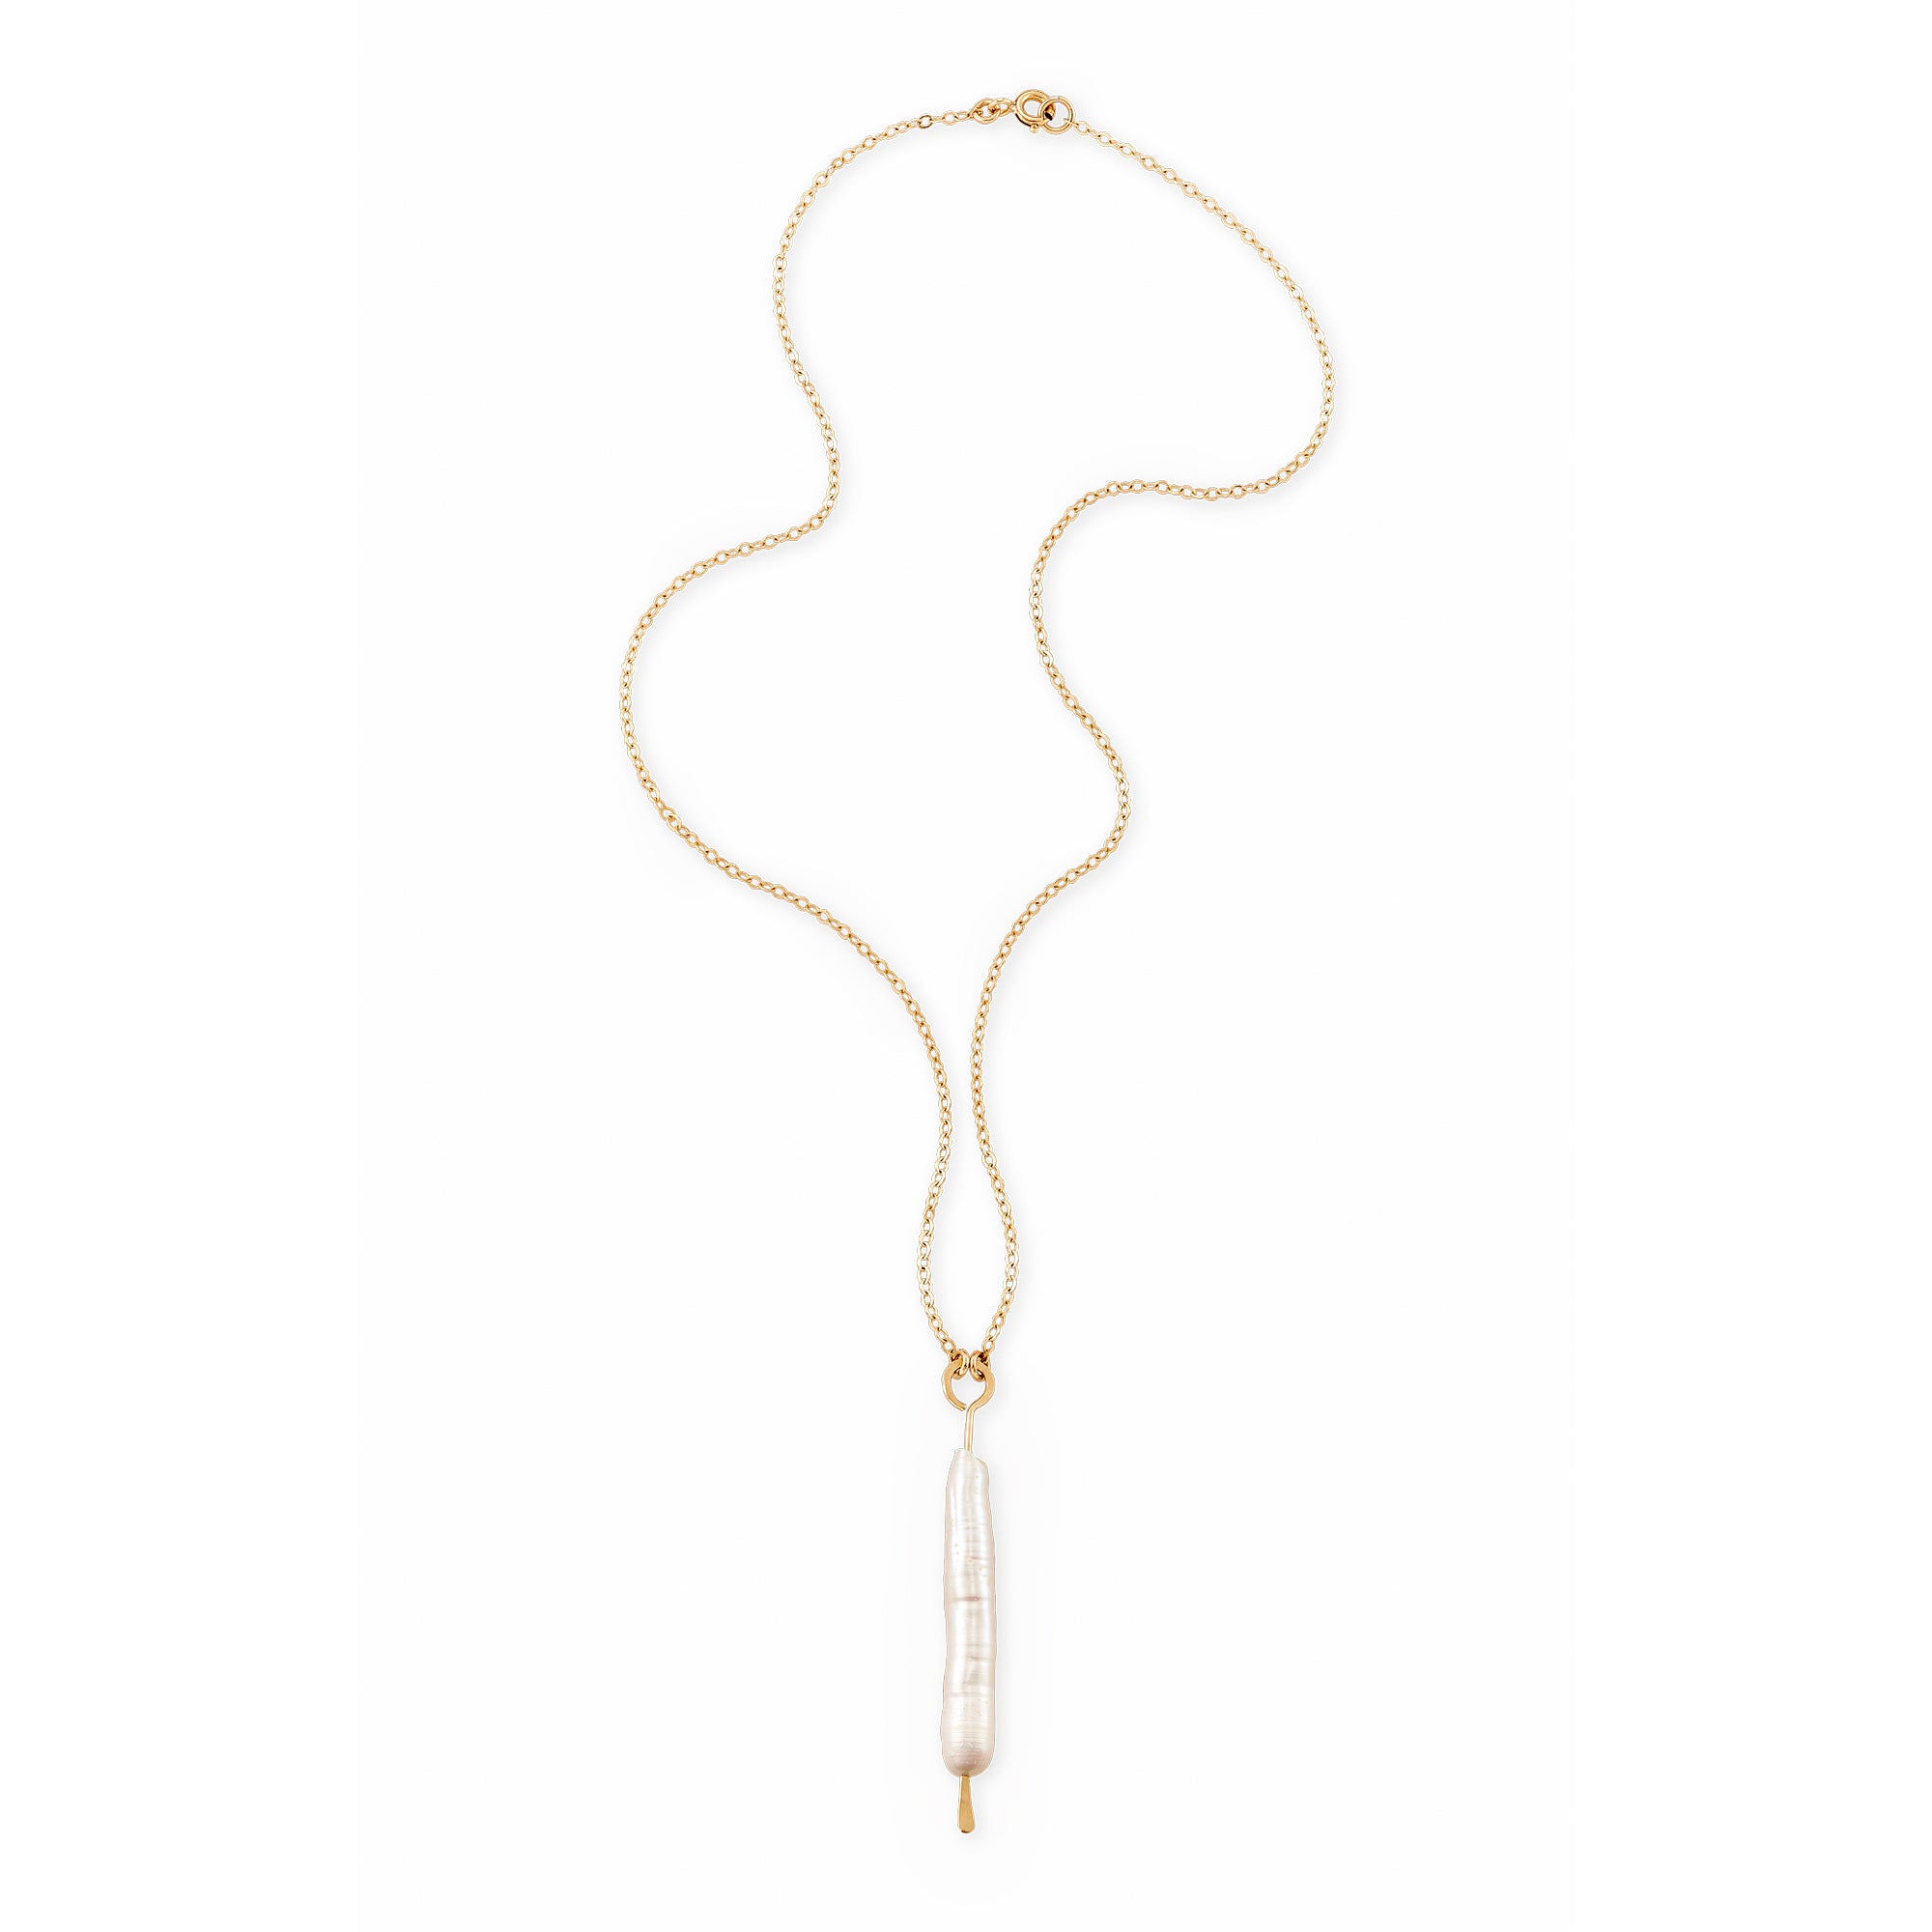 This simple necklace features elongated freshwater pearls that lend an organic element to an understated and graceful look.